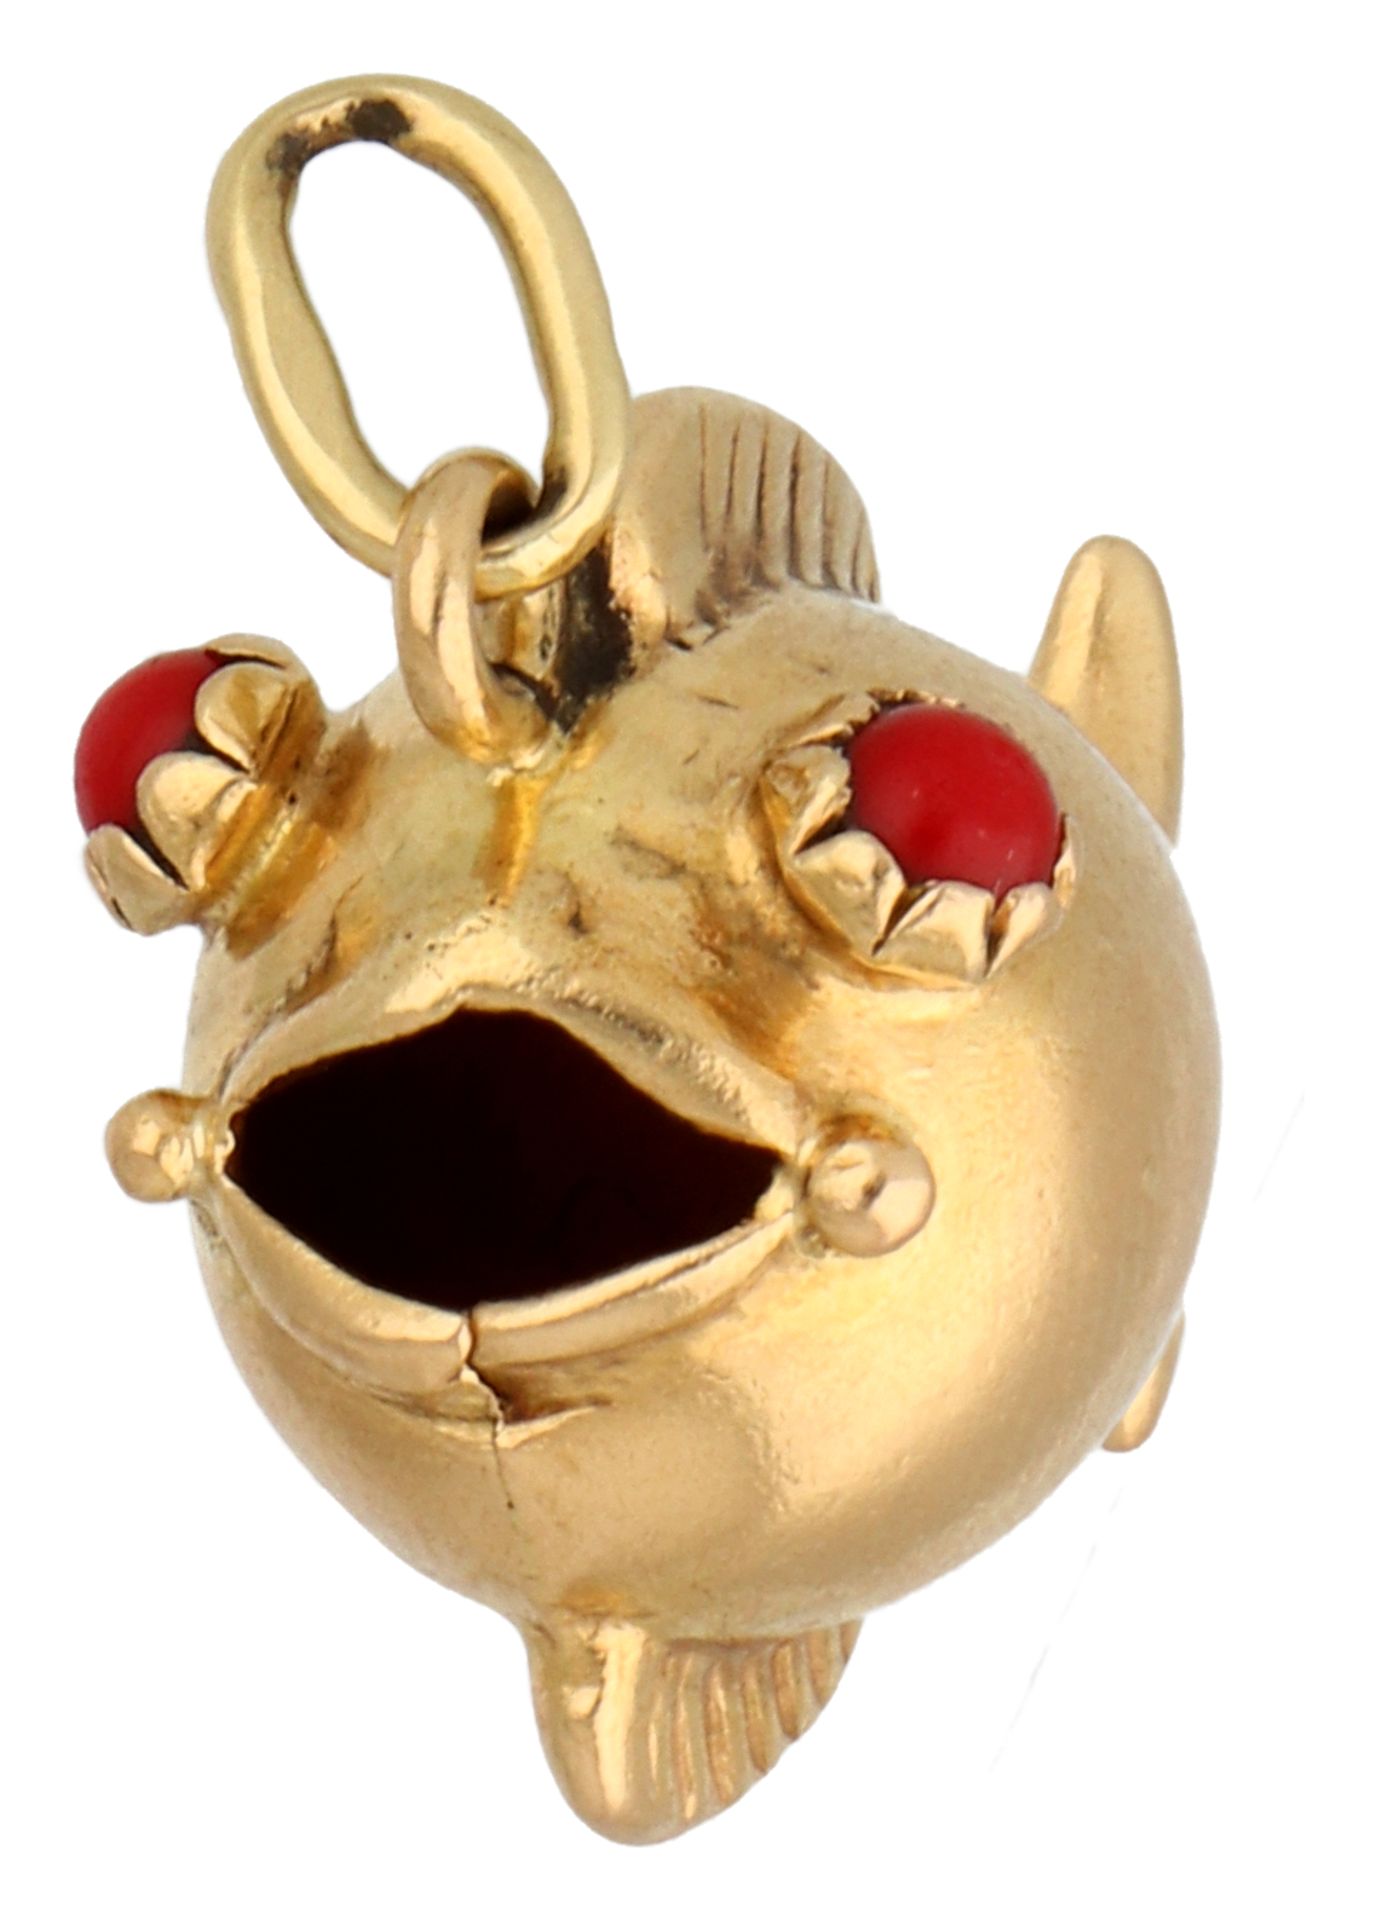 No reserve - 14K Yellow gold pendant of a puffer fish with red eyes. - Image 2 of 3